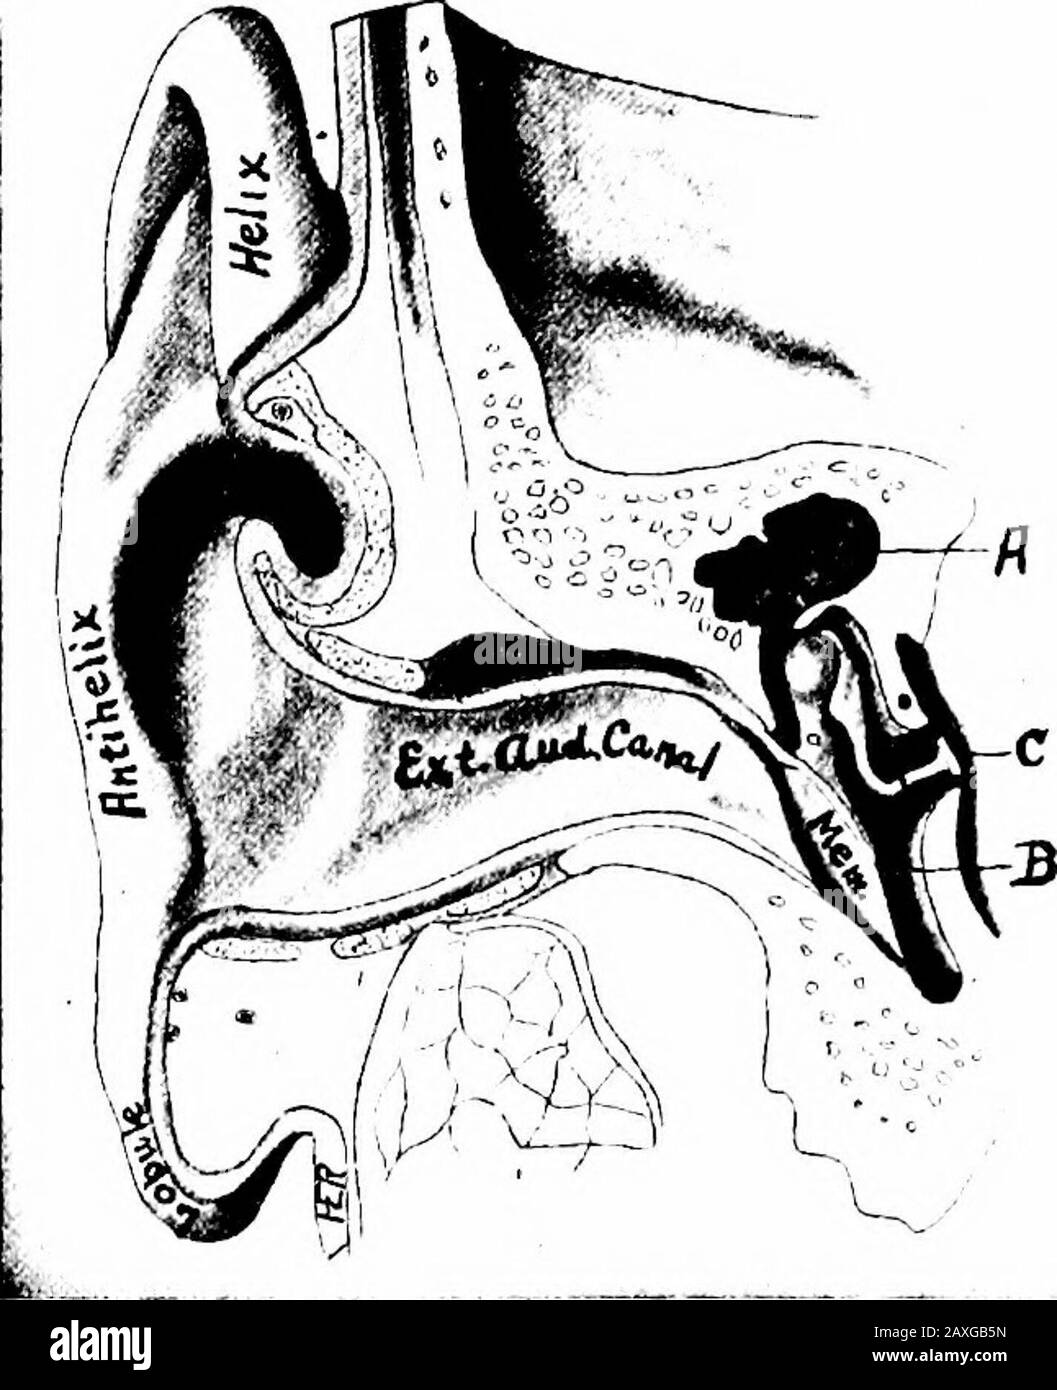 A manual of anatomy . kincontinued from the pinna and in it are found the ceruminous, orwax glands {glandulce ceruminosce) and many hairs {barbula hirci). THE MIDDLE EAR The middle portion, or tympanum {cavum tympani) consists of thetympanic cavity proper, the attic, the membrana tympani, the ossiclesand its connection with the pharynx, the auditory tube. 350 THE TYMPANIC CAVITY 351 The tympanic cavity proper, or atrium lies just medial tothe tympanic membrane and is a narrow space, quadrilateral inshape. It is placed practically parallel to the sagittal plane of thebody. Its length and height Stock Photo